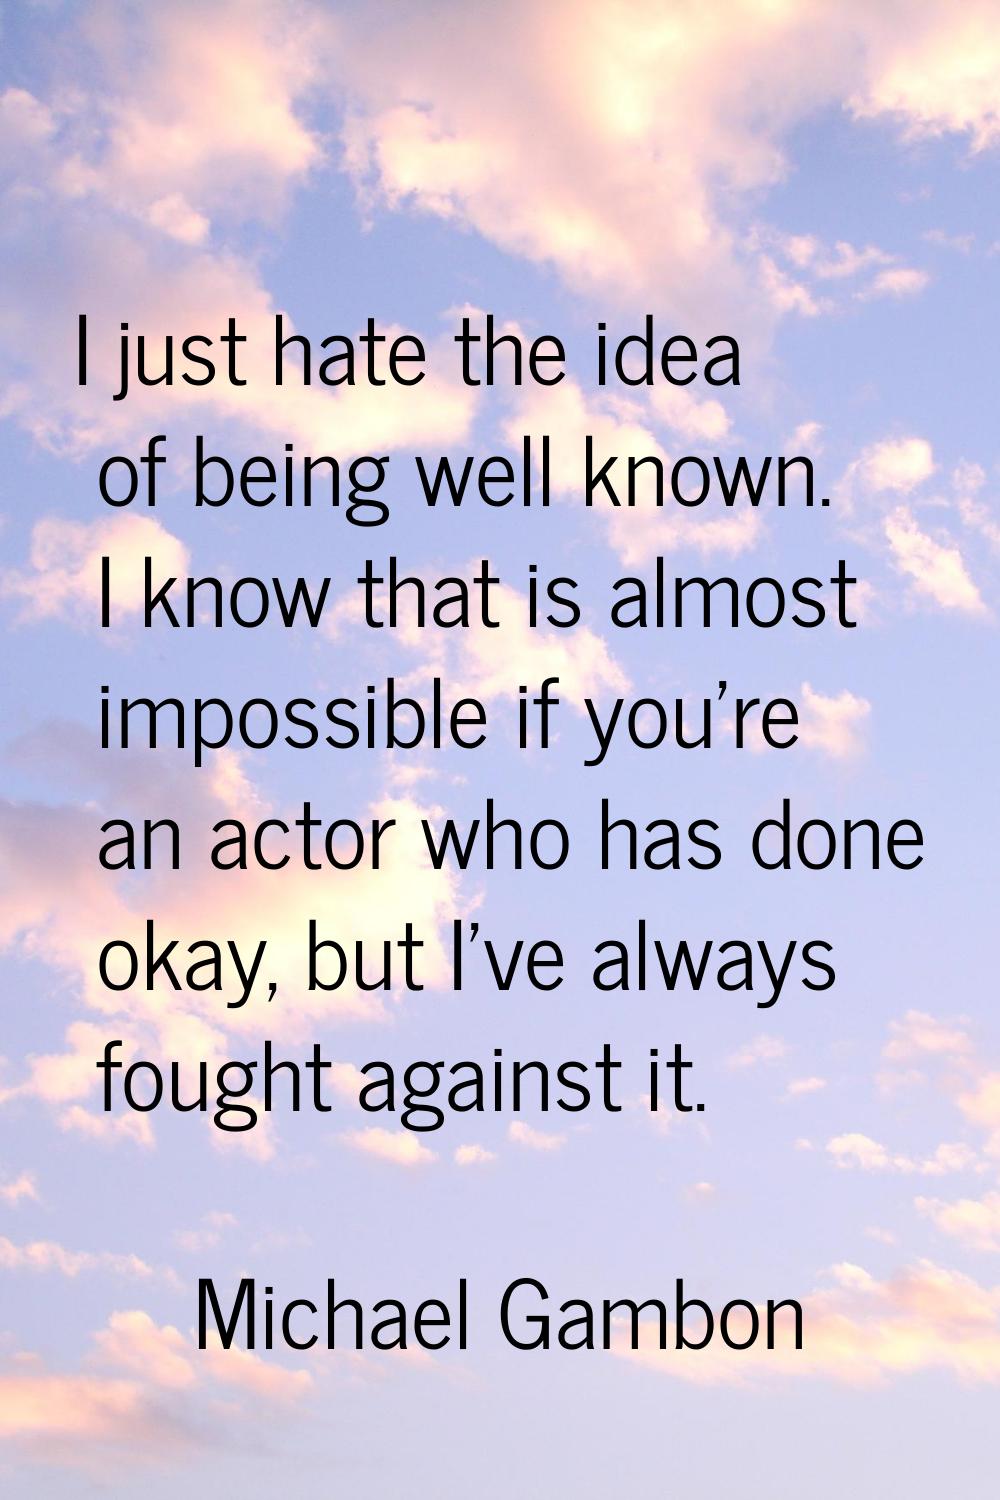 I just hate the idea of being well known. I know that is almost impossible if you're an actor who h